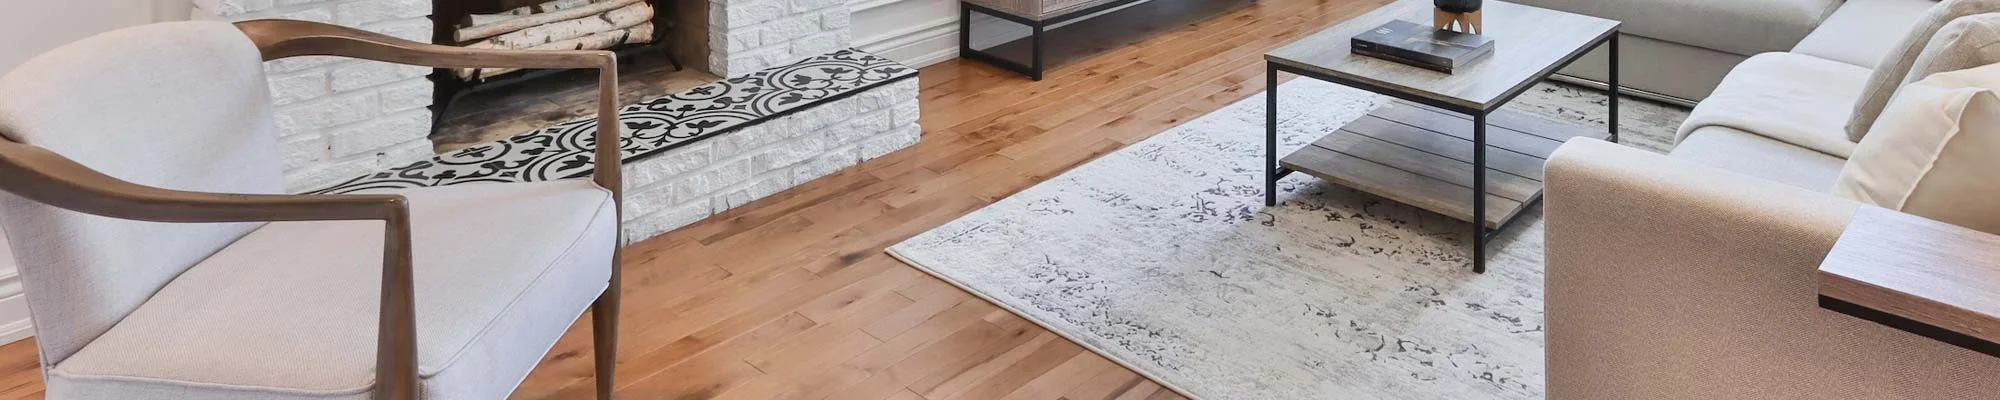 View Valley Forge Rug Co.'s Flooring Product Catalog